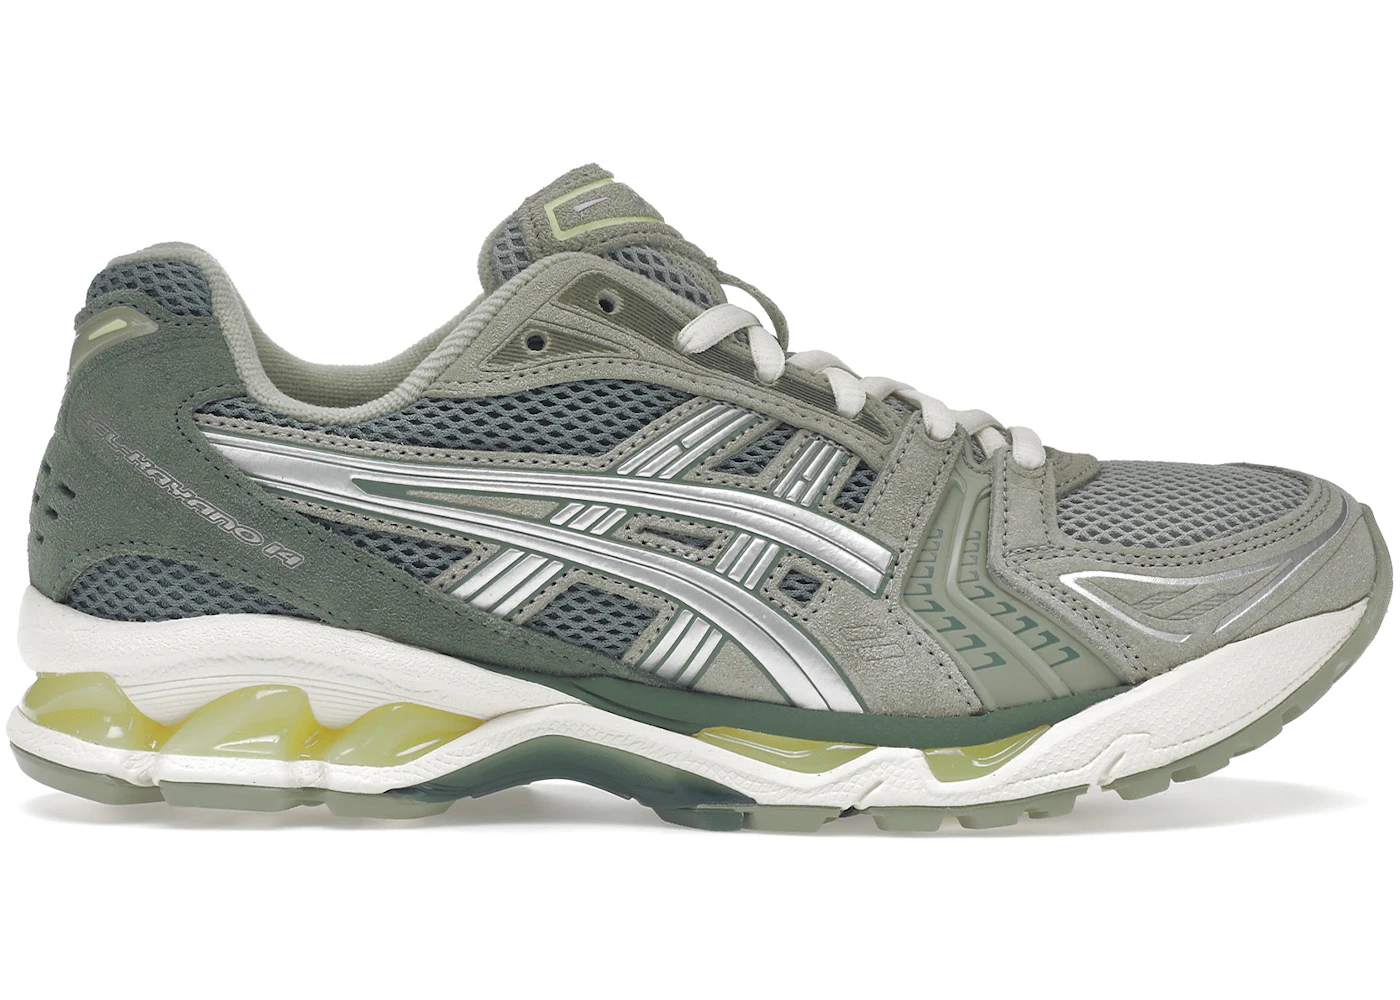 ASICS Gel-Kayano 14 Olive Grey Pure Silver - 1201A161-301 - US